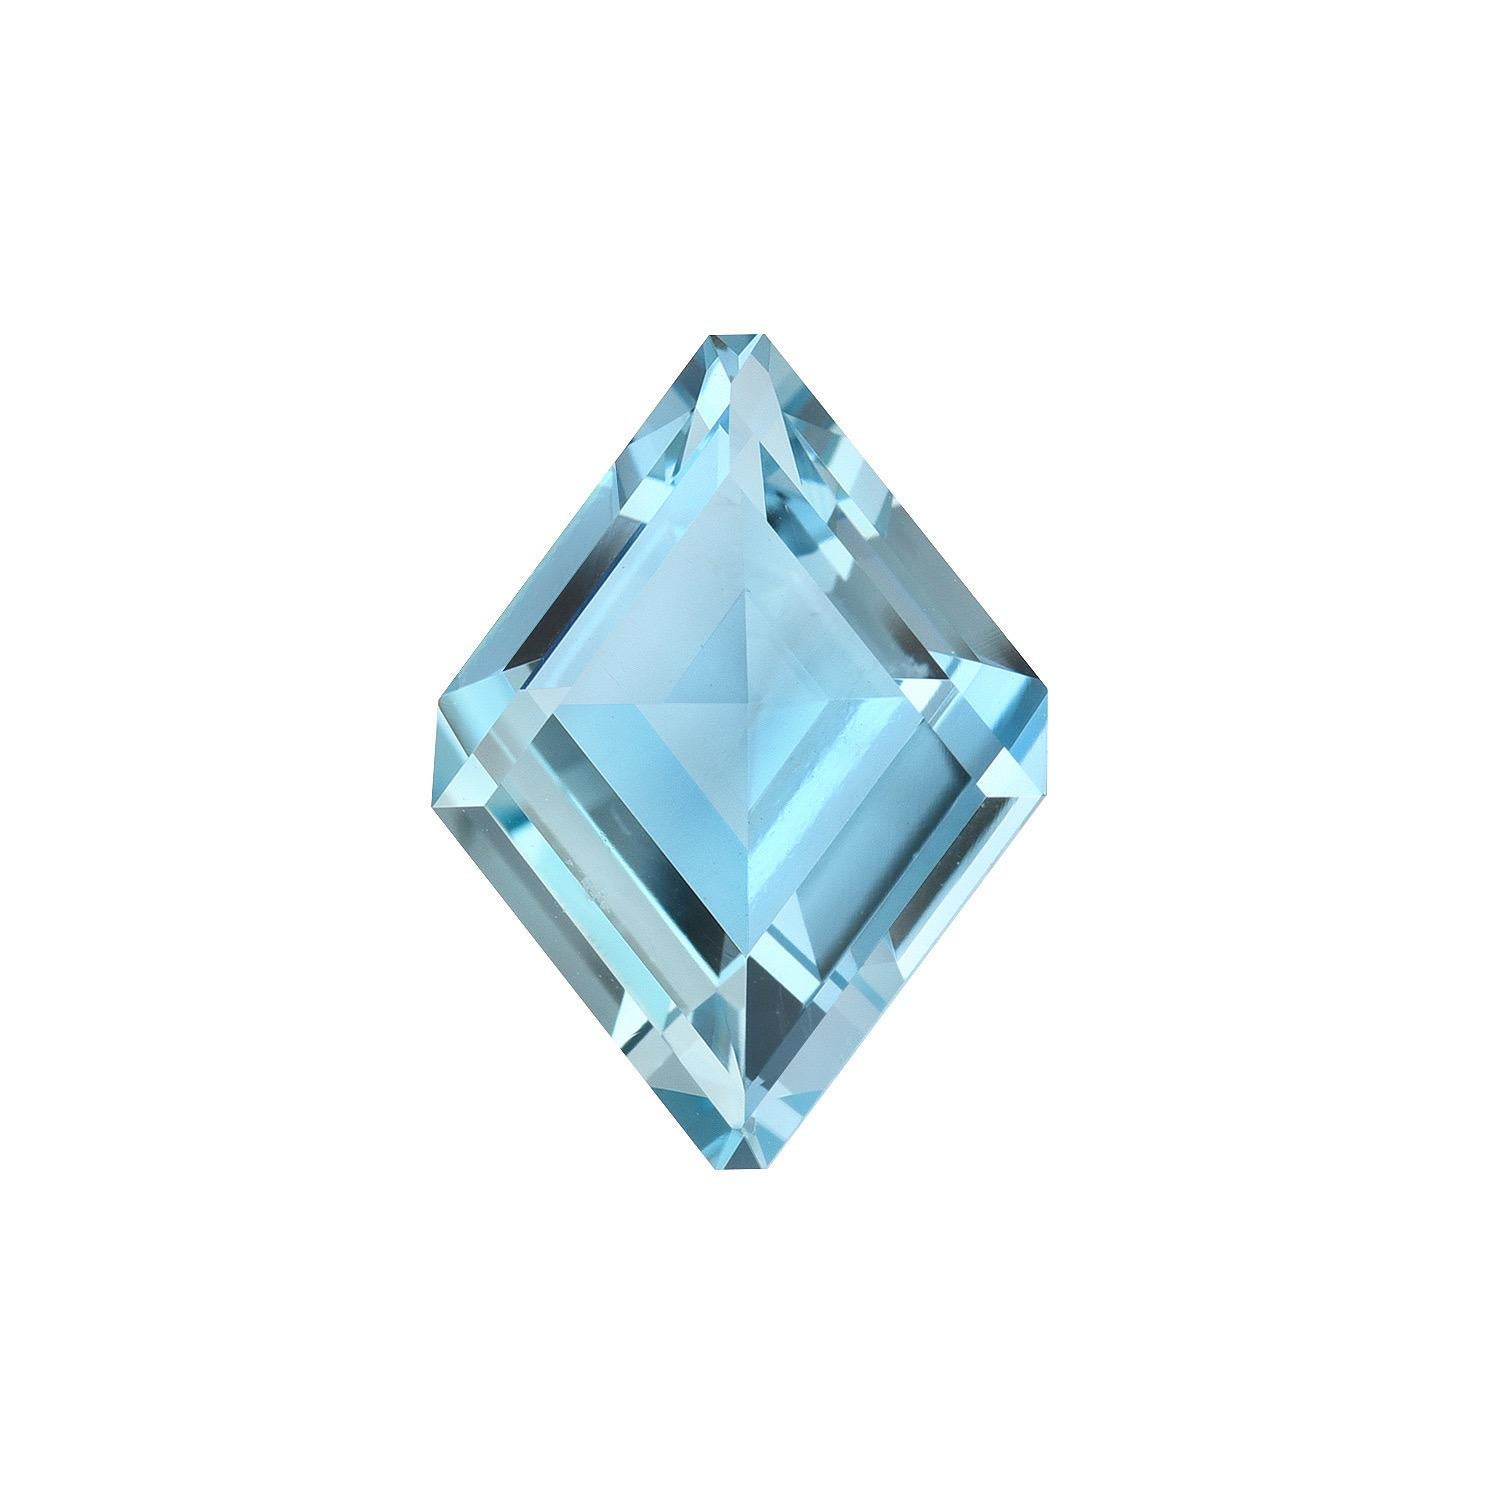 Spectacular 3.21 carat Aquamarine Kite loose gemstone, offered unmounted to a devoted fine gem lover..
Dimensions: 14.4 x 10.5 x 5 mm.
Returns are accepted and paid by us within 7 days of delivery.
We offer supreme custom jewelry work upon request.